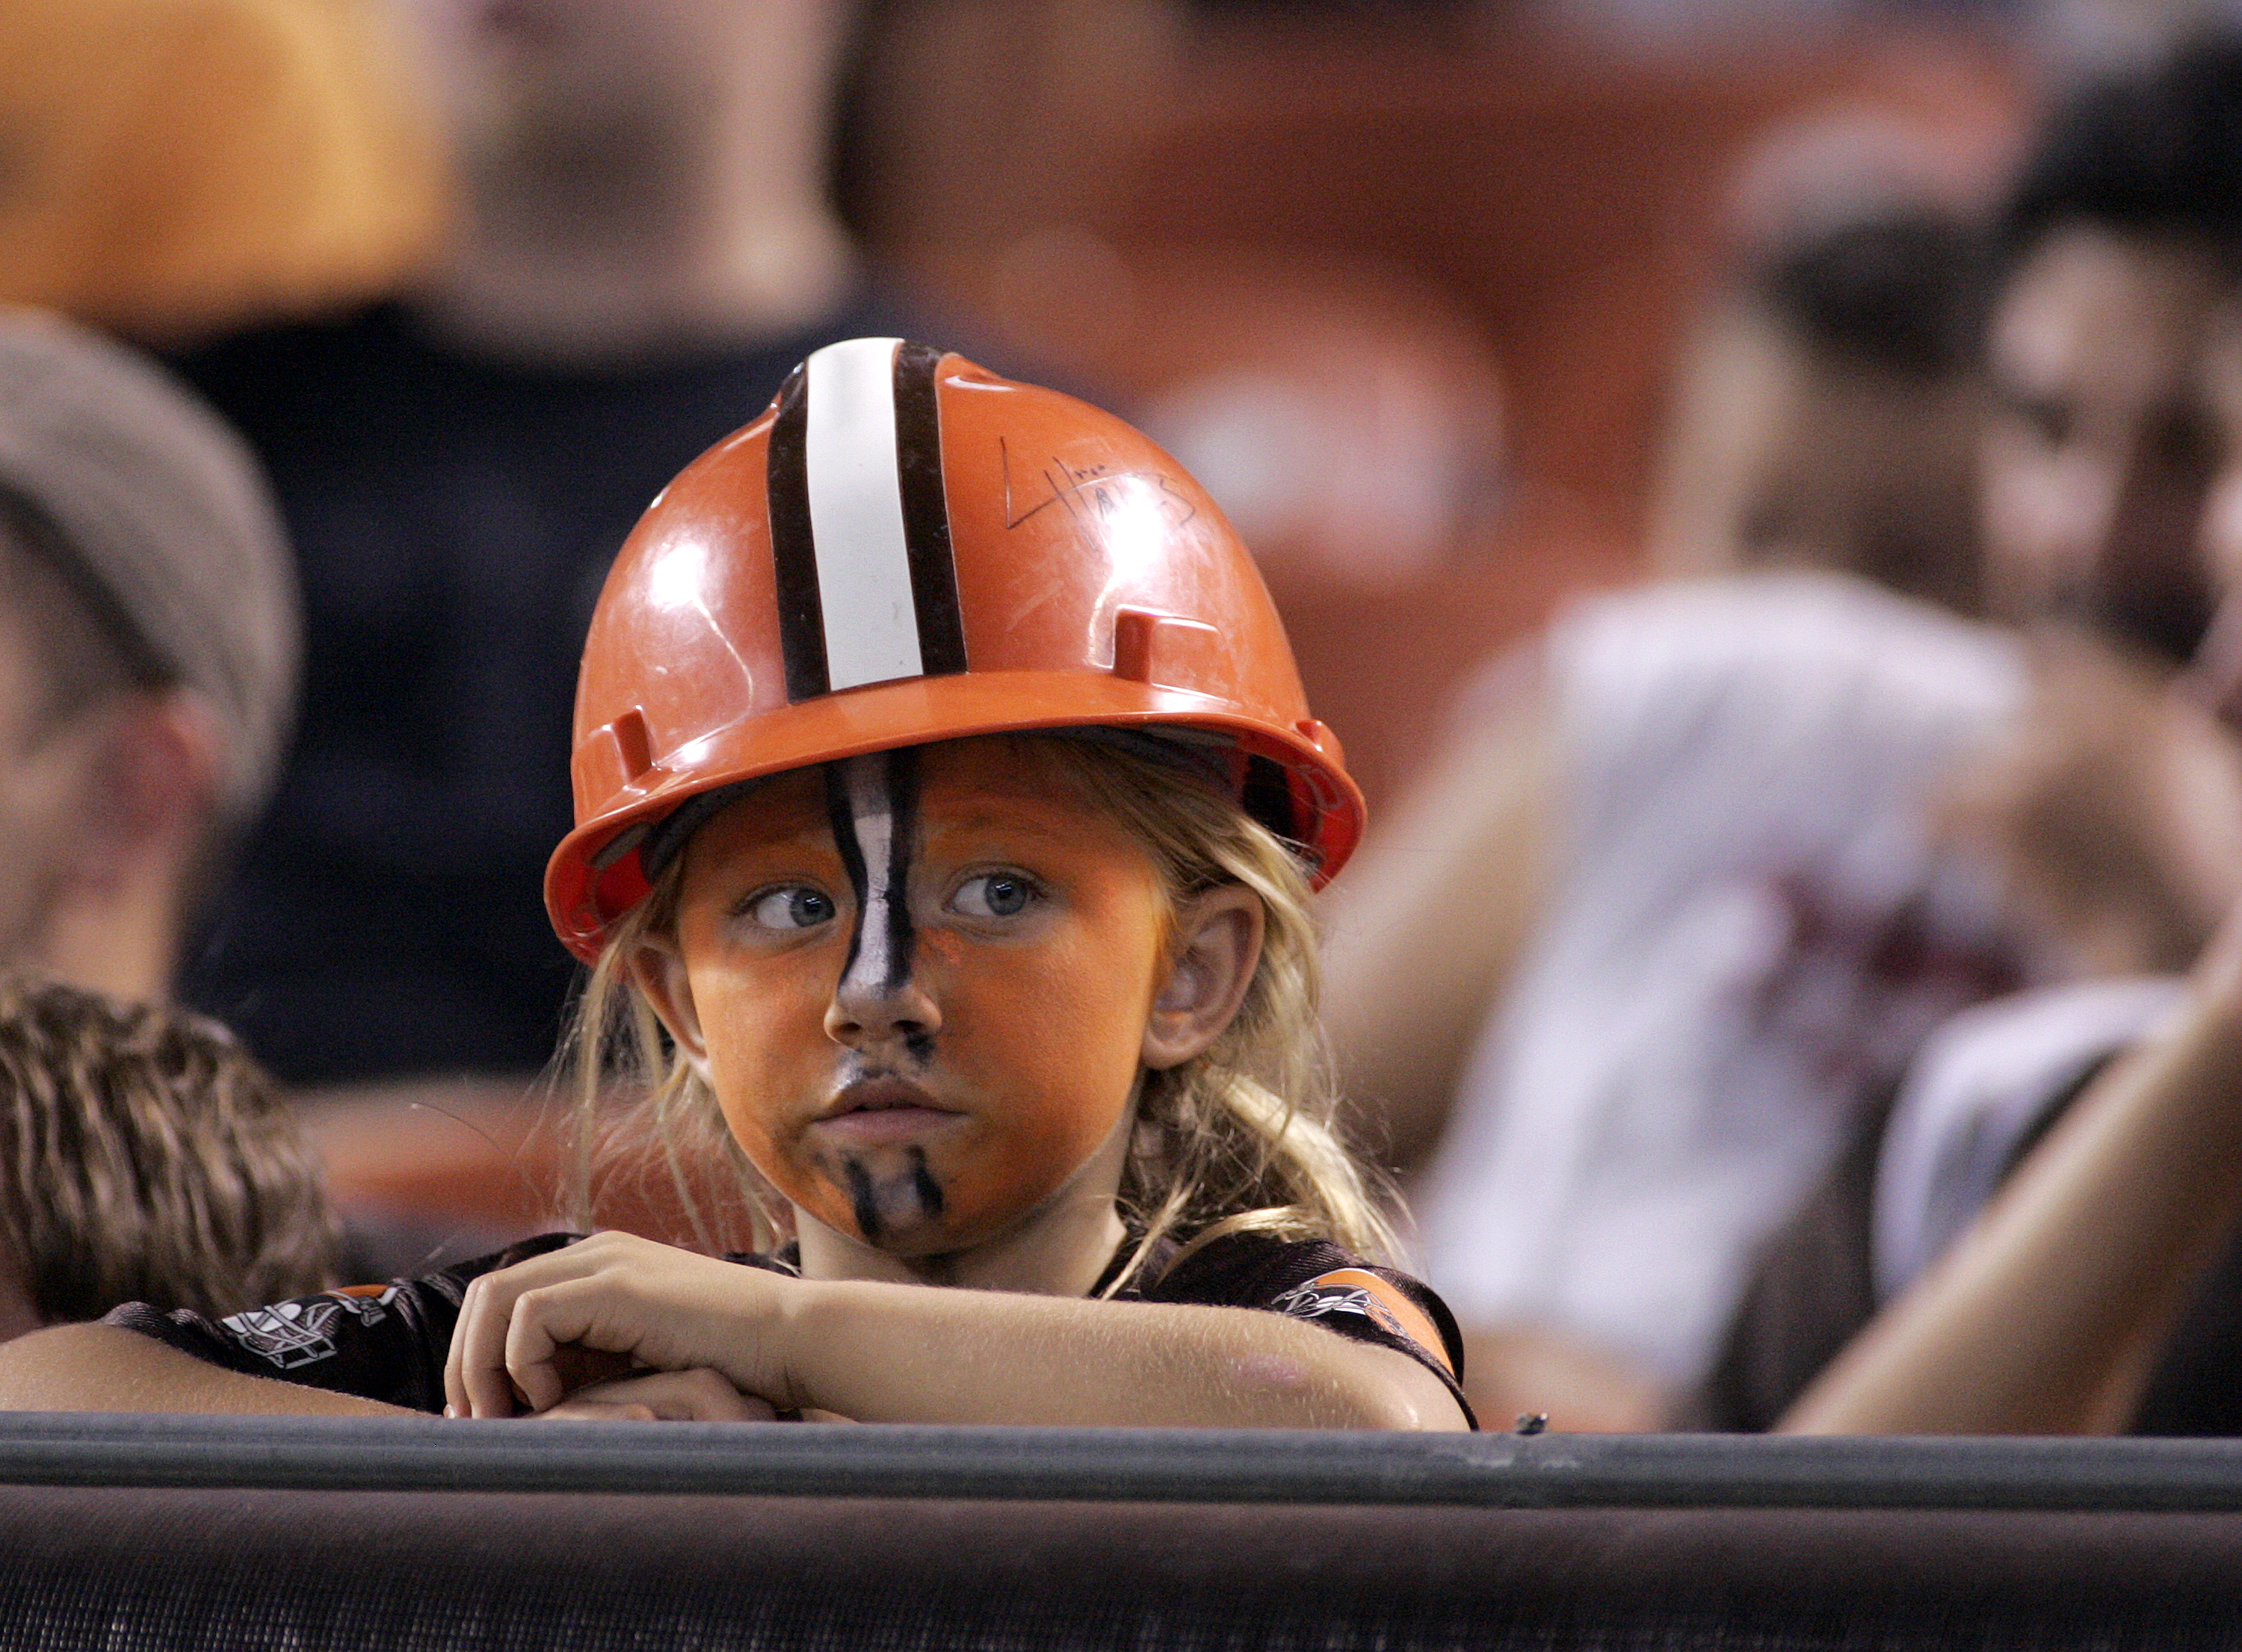 CLEVELAND - SEPTEMBER 2:  A young Cleveland Browns fan looks on during the preseason game against the Chicago Bears on September 2, 2010 at Cleveland Browns Stadium in Cleveland, Ohio. The Browns defeated the Bears 13-10.  (Photo by Justin K. Aller/Getty